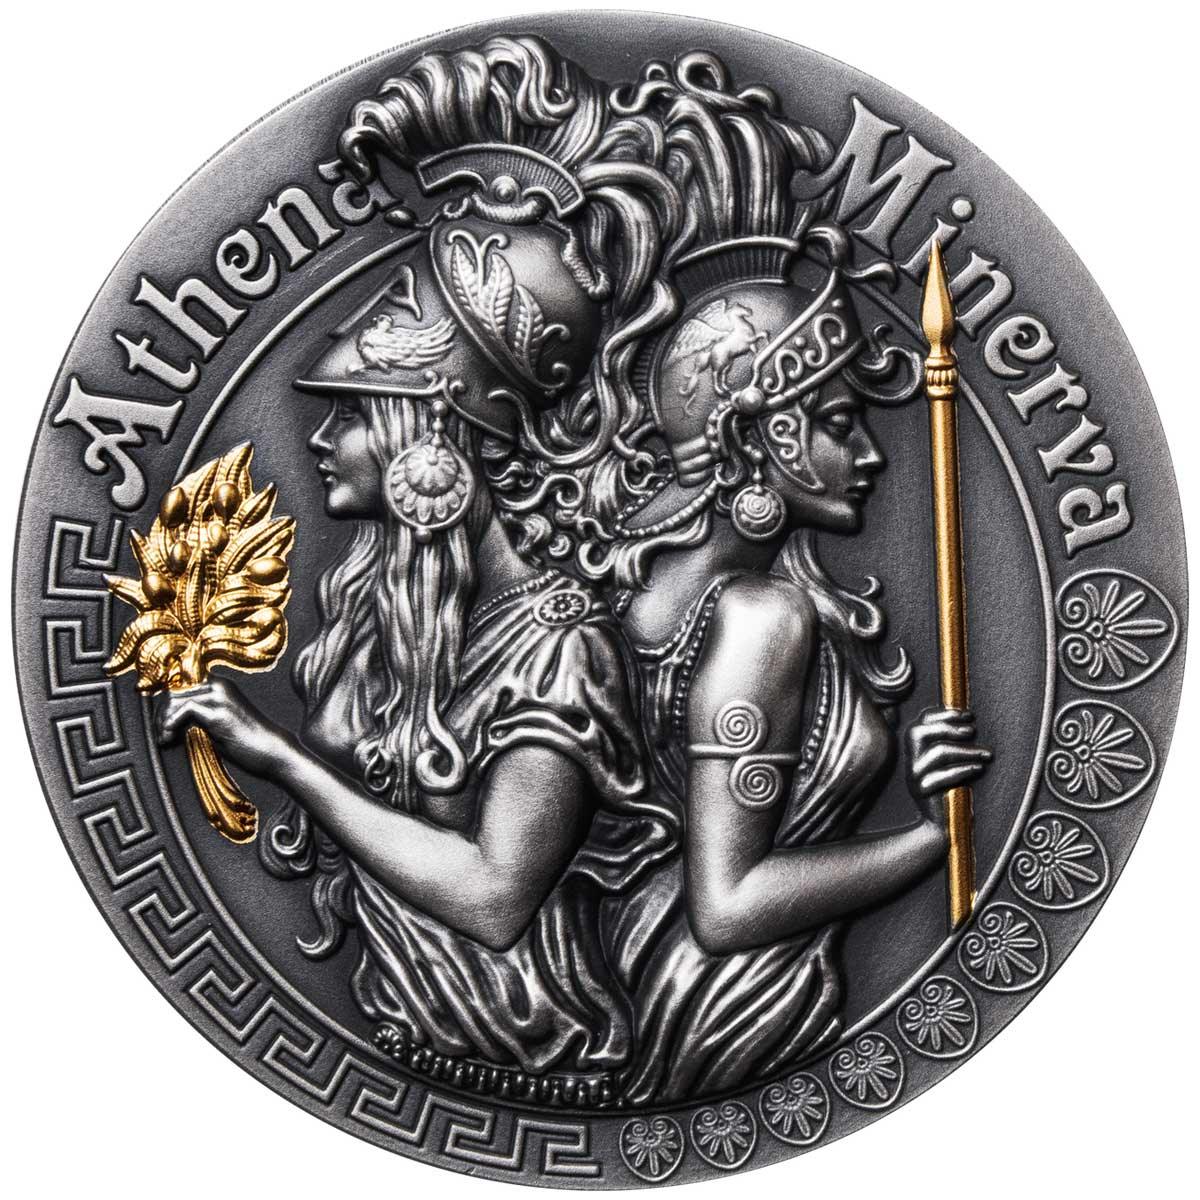 ATHENA AND MINERVA Strong and Beautiful Goddesses 2 Oz Silver Coin 5$ Niue 2019 - PARTHAVA COIN